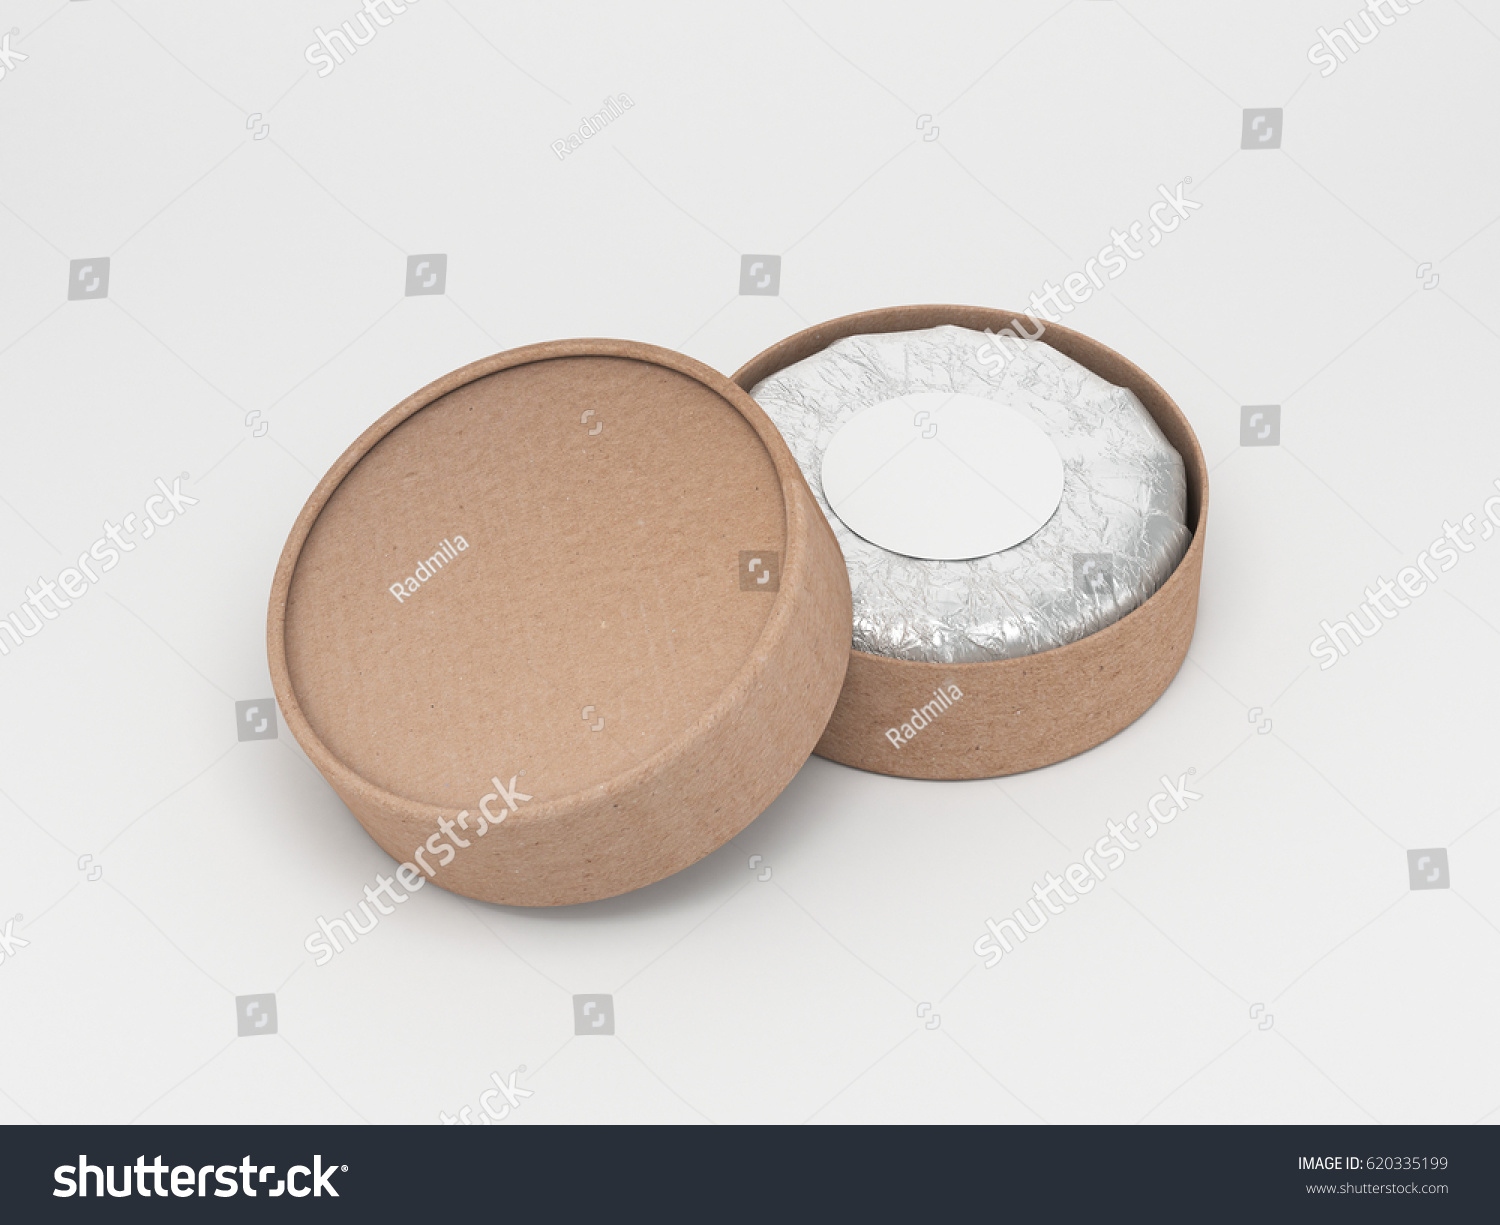 Download Carton Round Box Mockup Cylindrical Packaging Stock Illustration 620335199